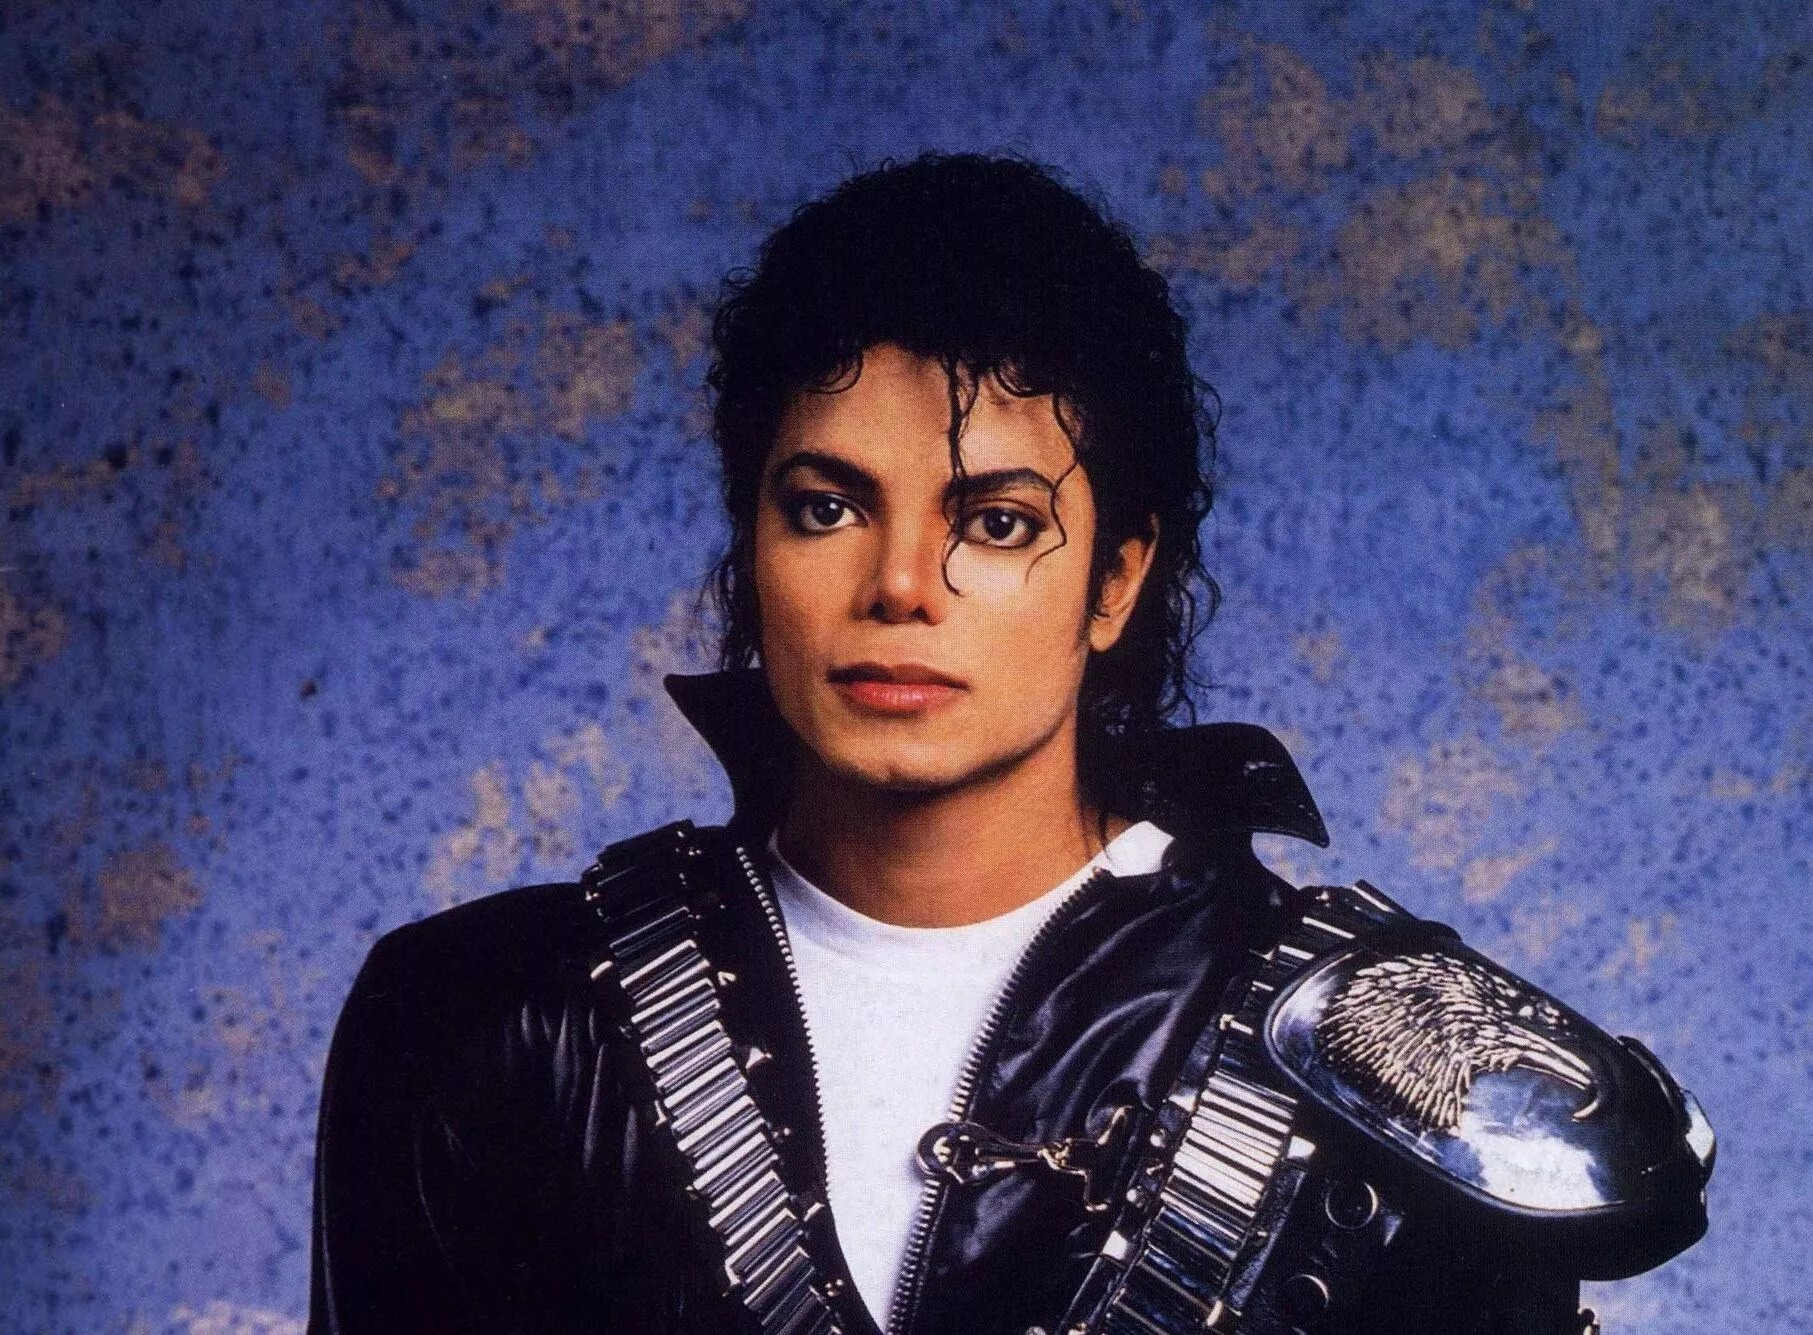 Michael Jackson: His best fashion looks and style in 10 photos